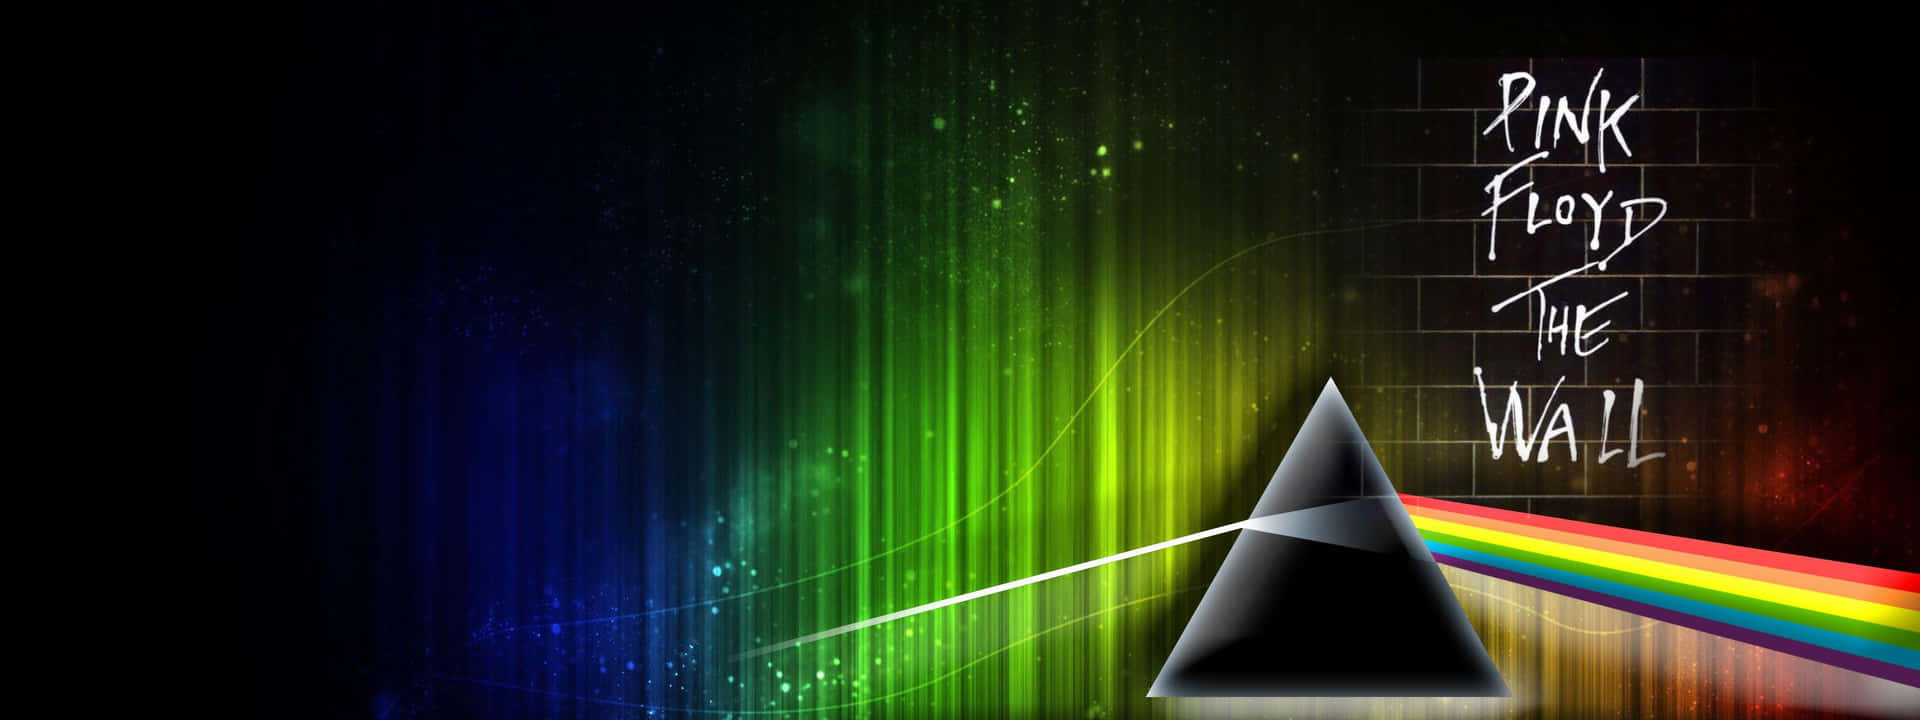 Explore the Dark Side With Pink Floyd's Dark Side of The Moon Wallpaper